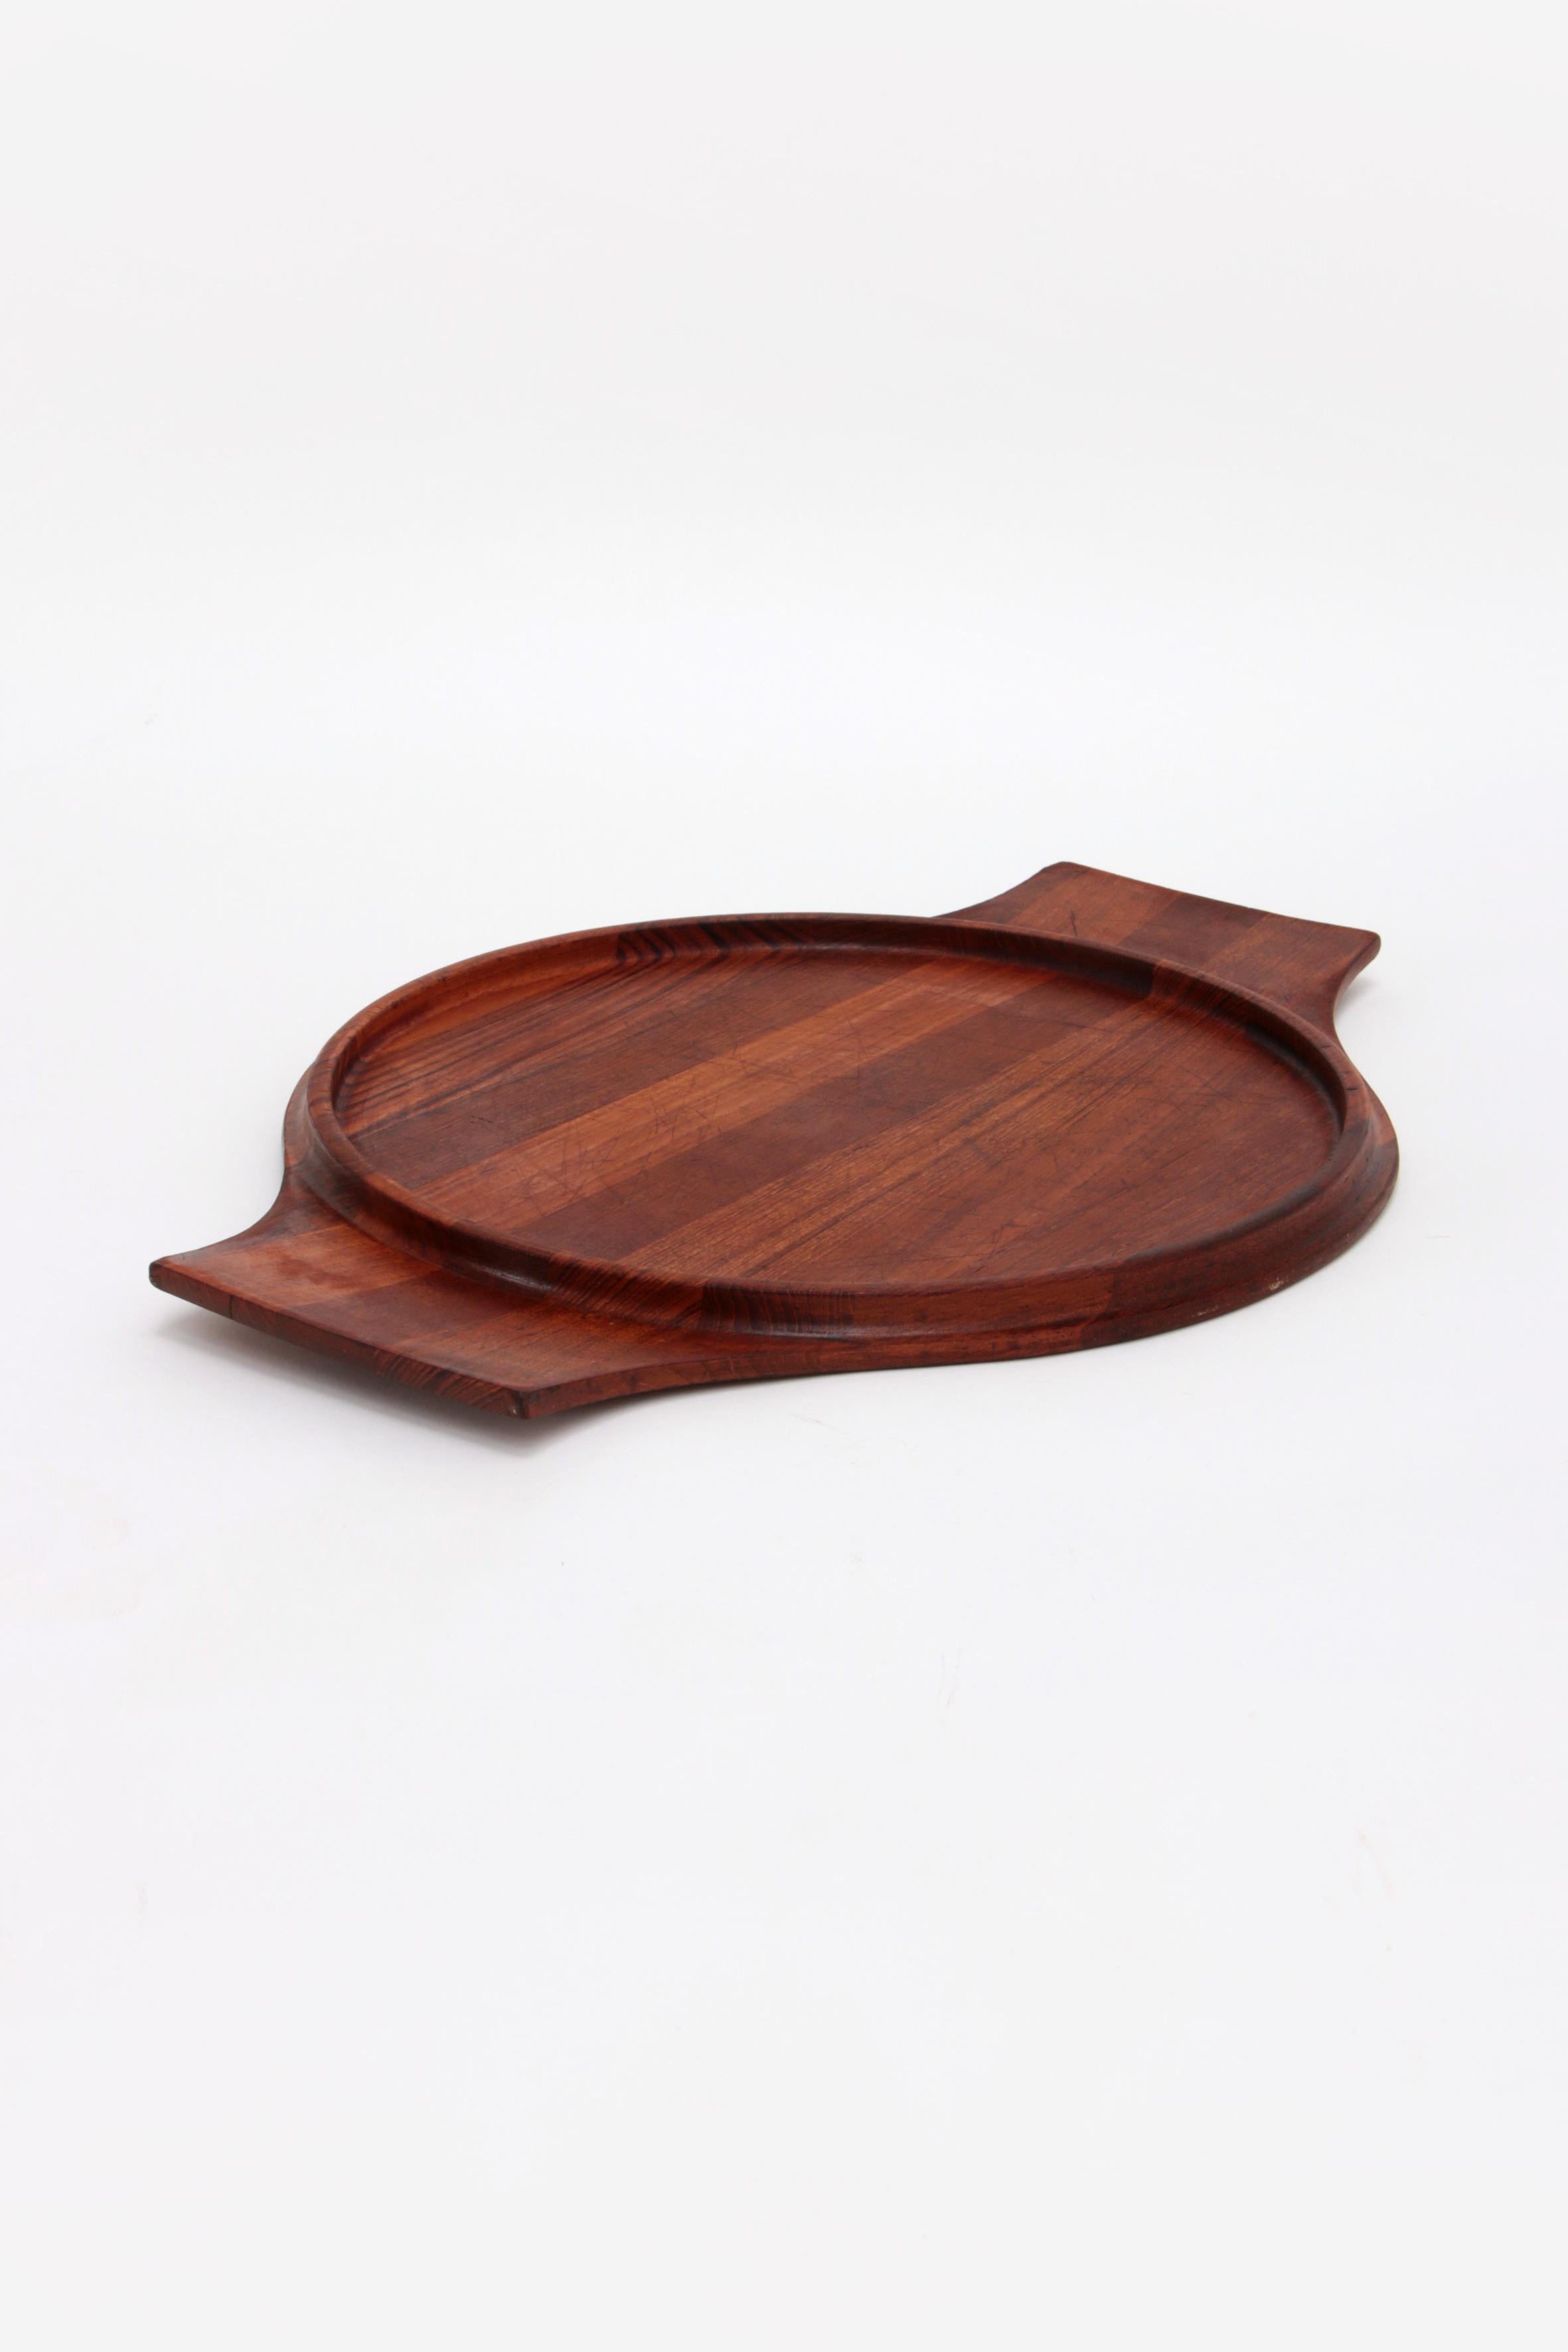 Timelessly beautiful solid teak tray, original Danish Midcentury by Dansk design denmark iho trademark on the bottom.

In excellent condition with signs of use. Used and made in the best quality of life around 1960.

Wonderful to drink, it